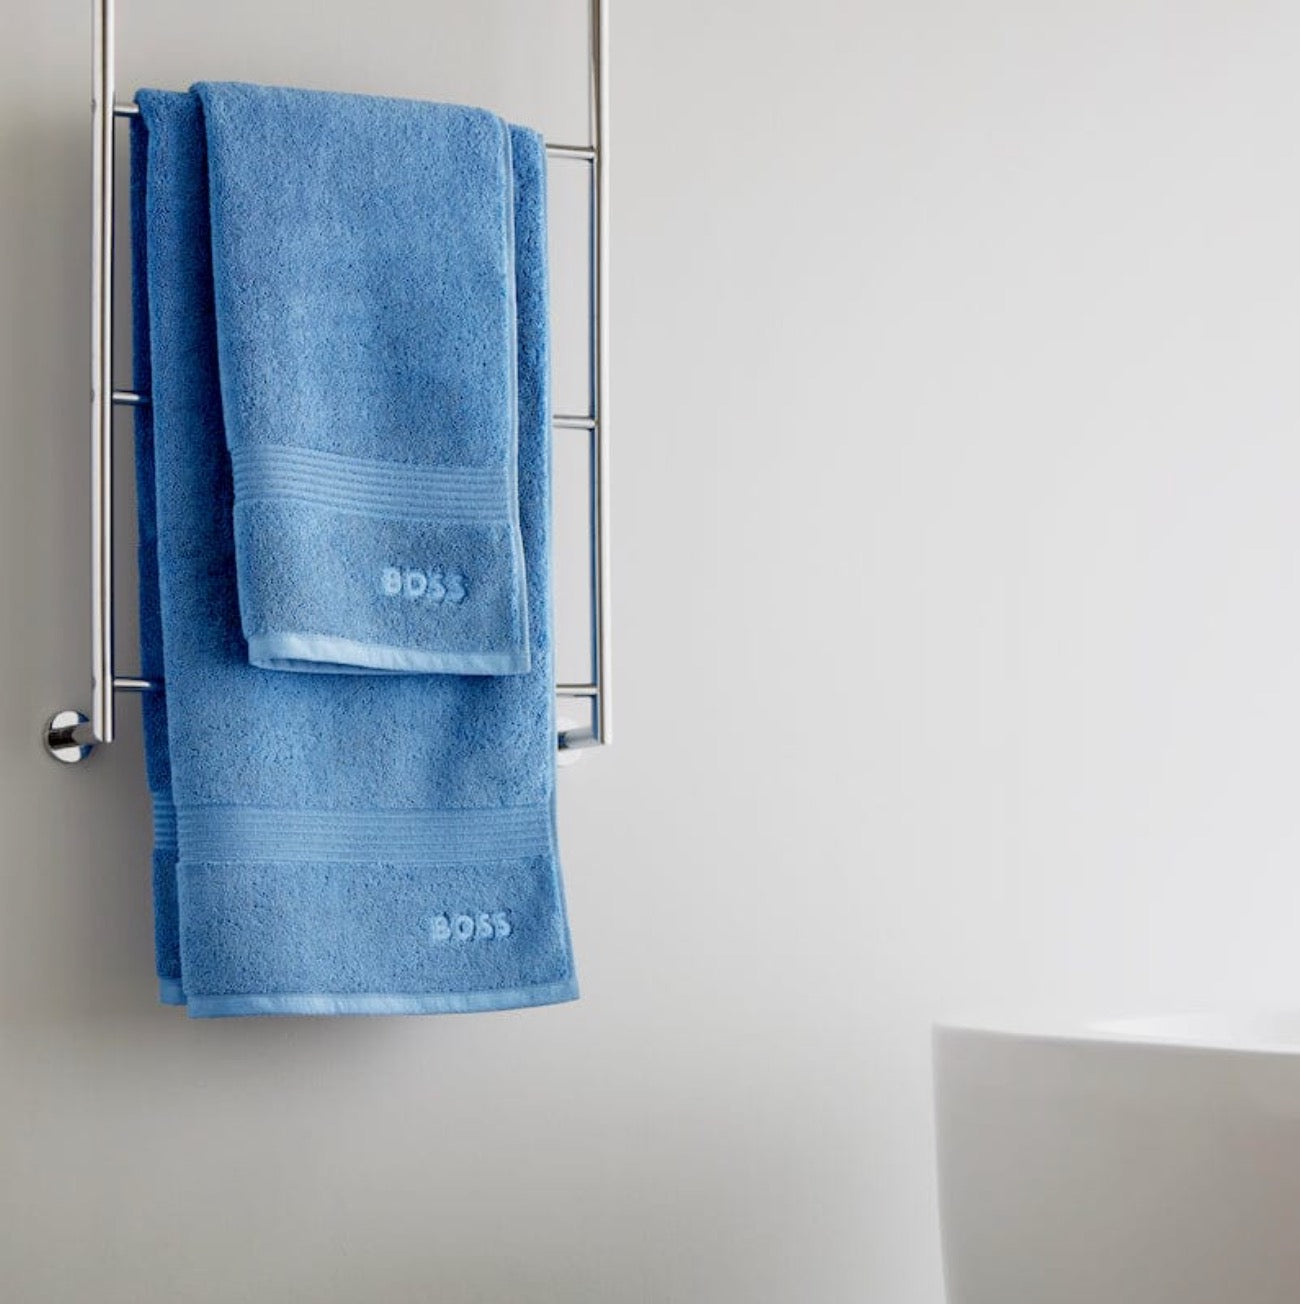 Handwoven Towels: Common Sizes and Types